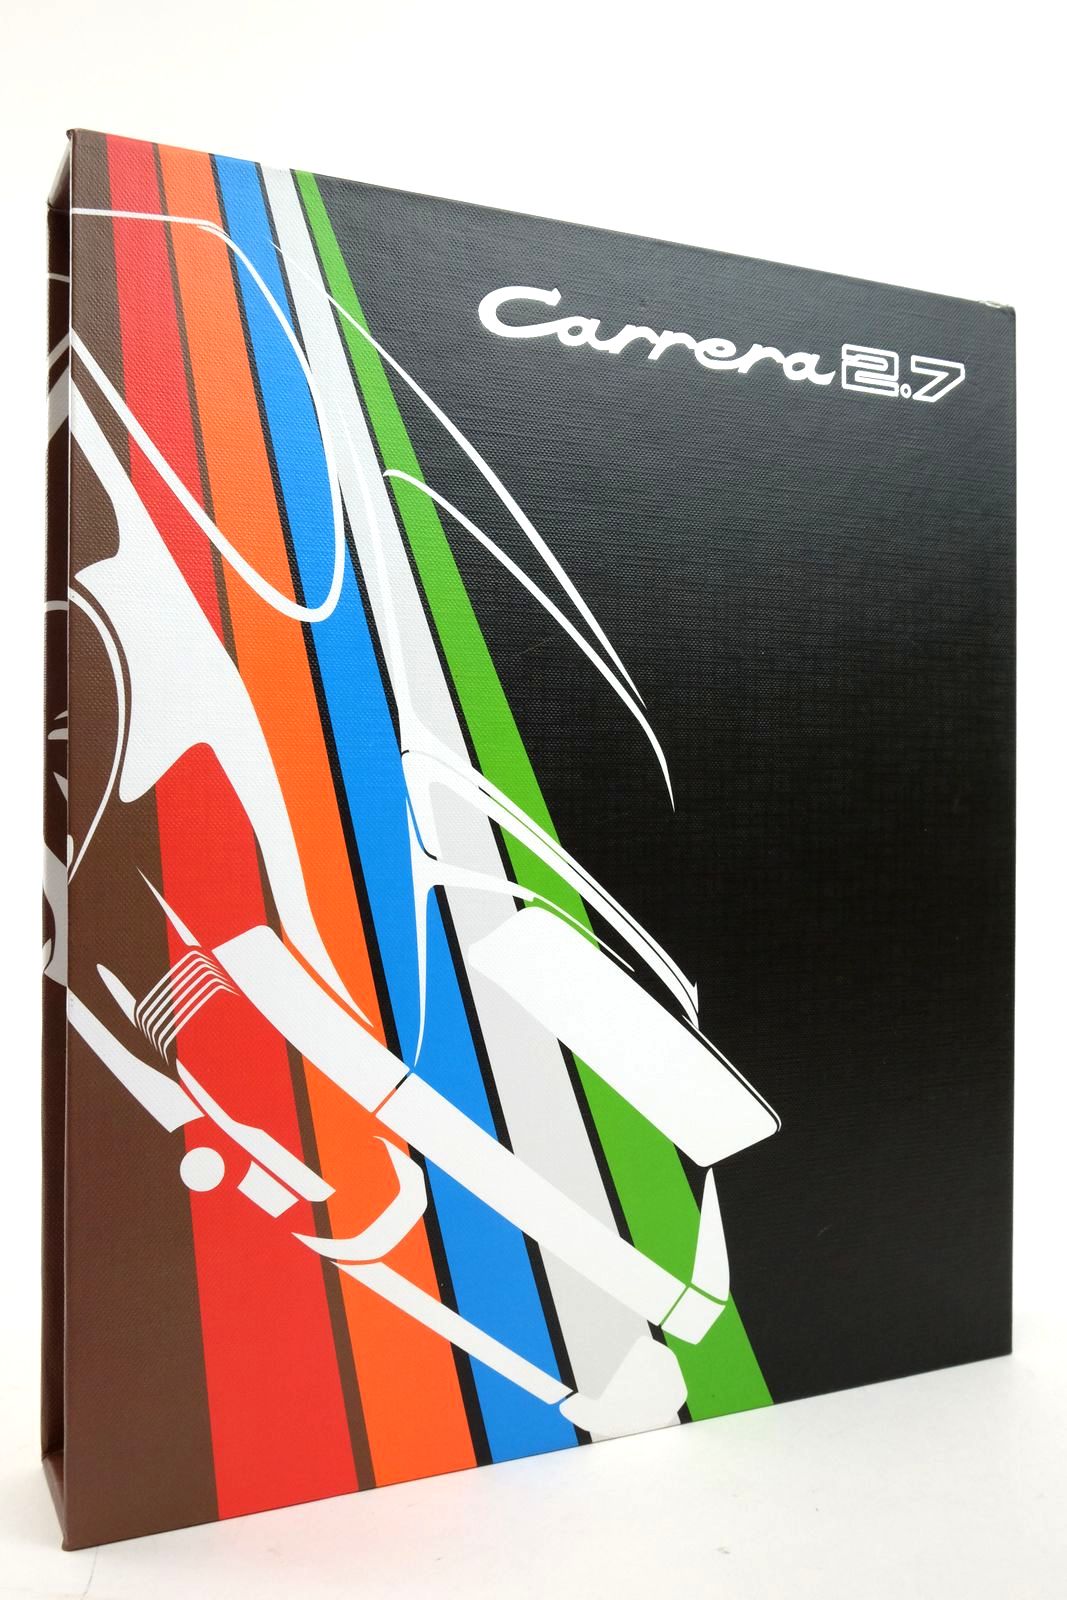 Photo of CARRERA 2.7 written by Snodgrass, Ryan published by Parabolica Press (STOCK CODE: 2136581)  for sale by Stella & Rose's Books